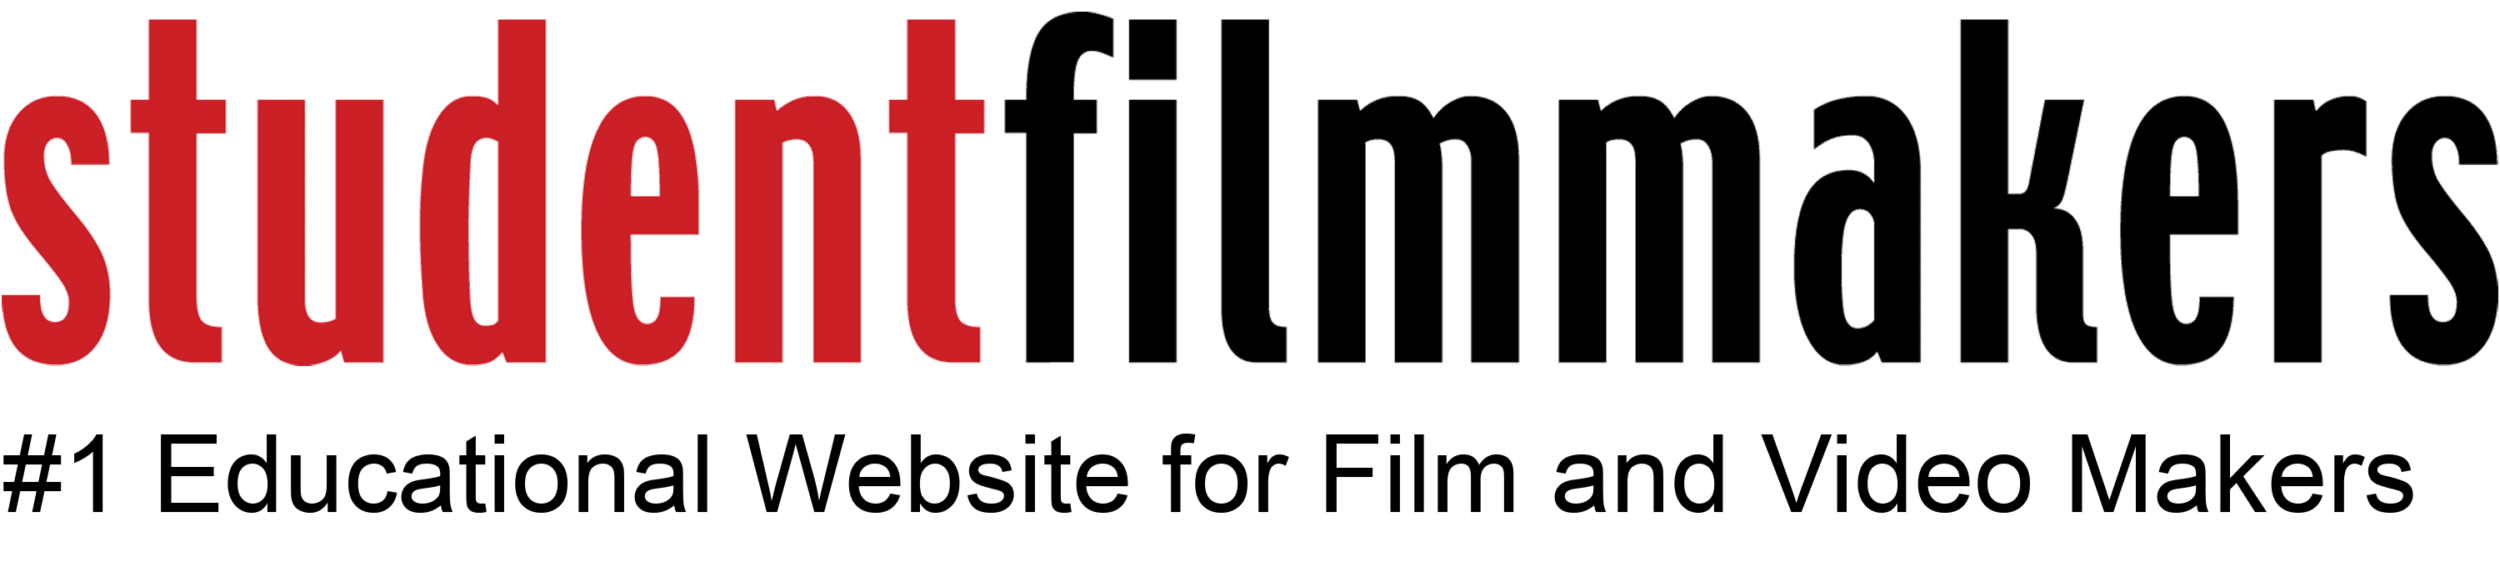 Student Filmmakers: #1 Educational Website for Film and Video Makers